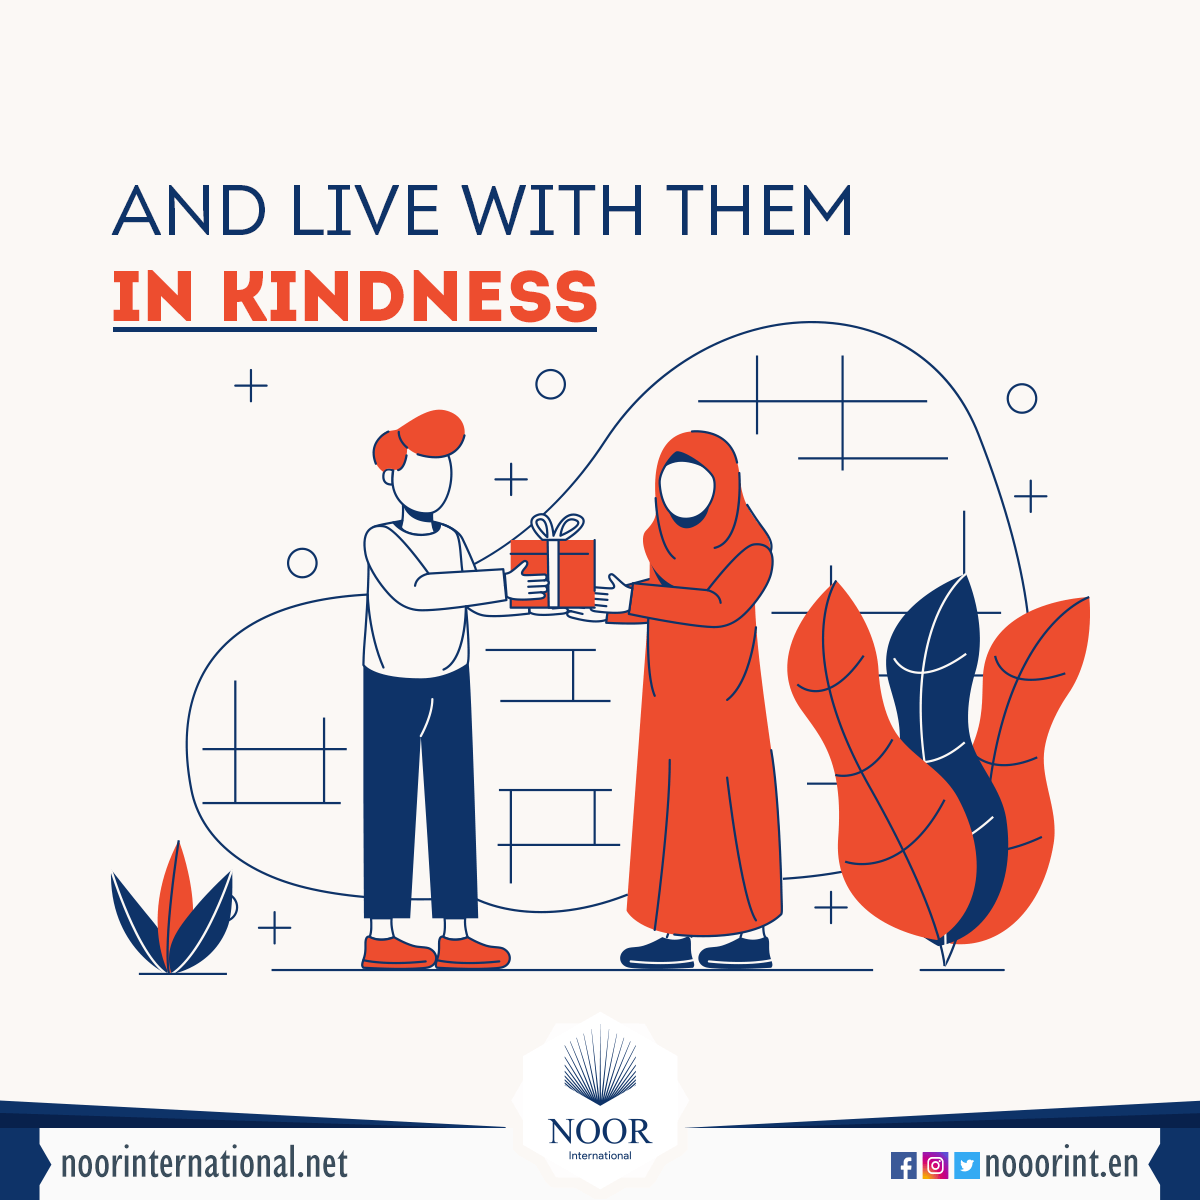 And live with them in kindness